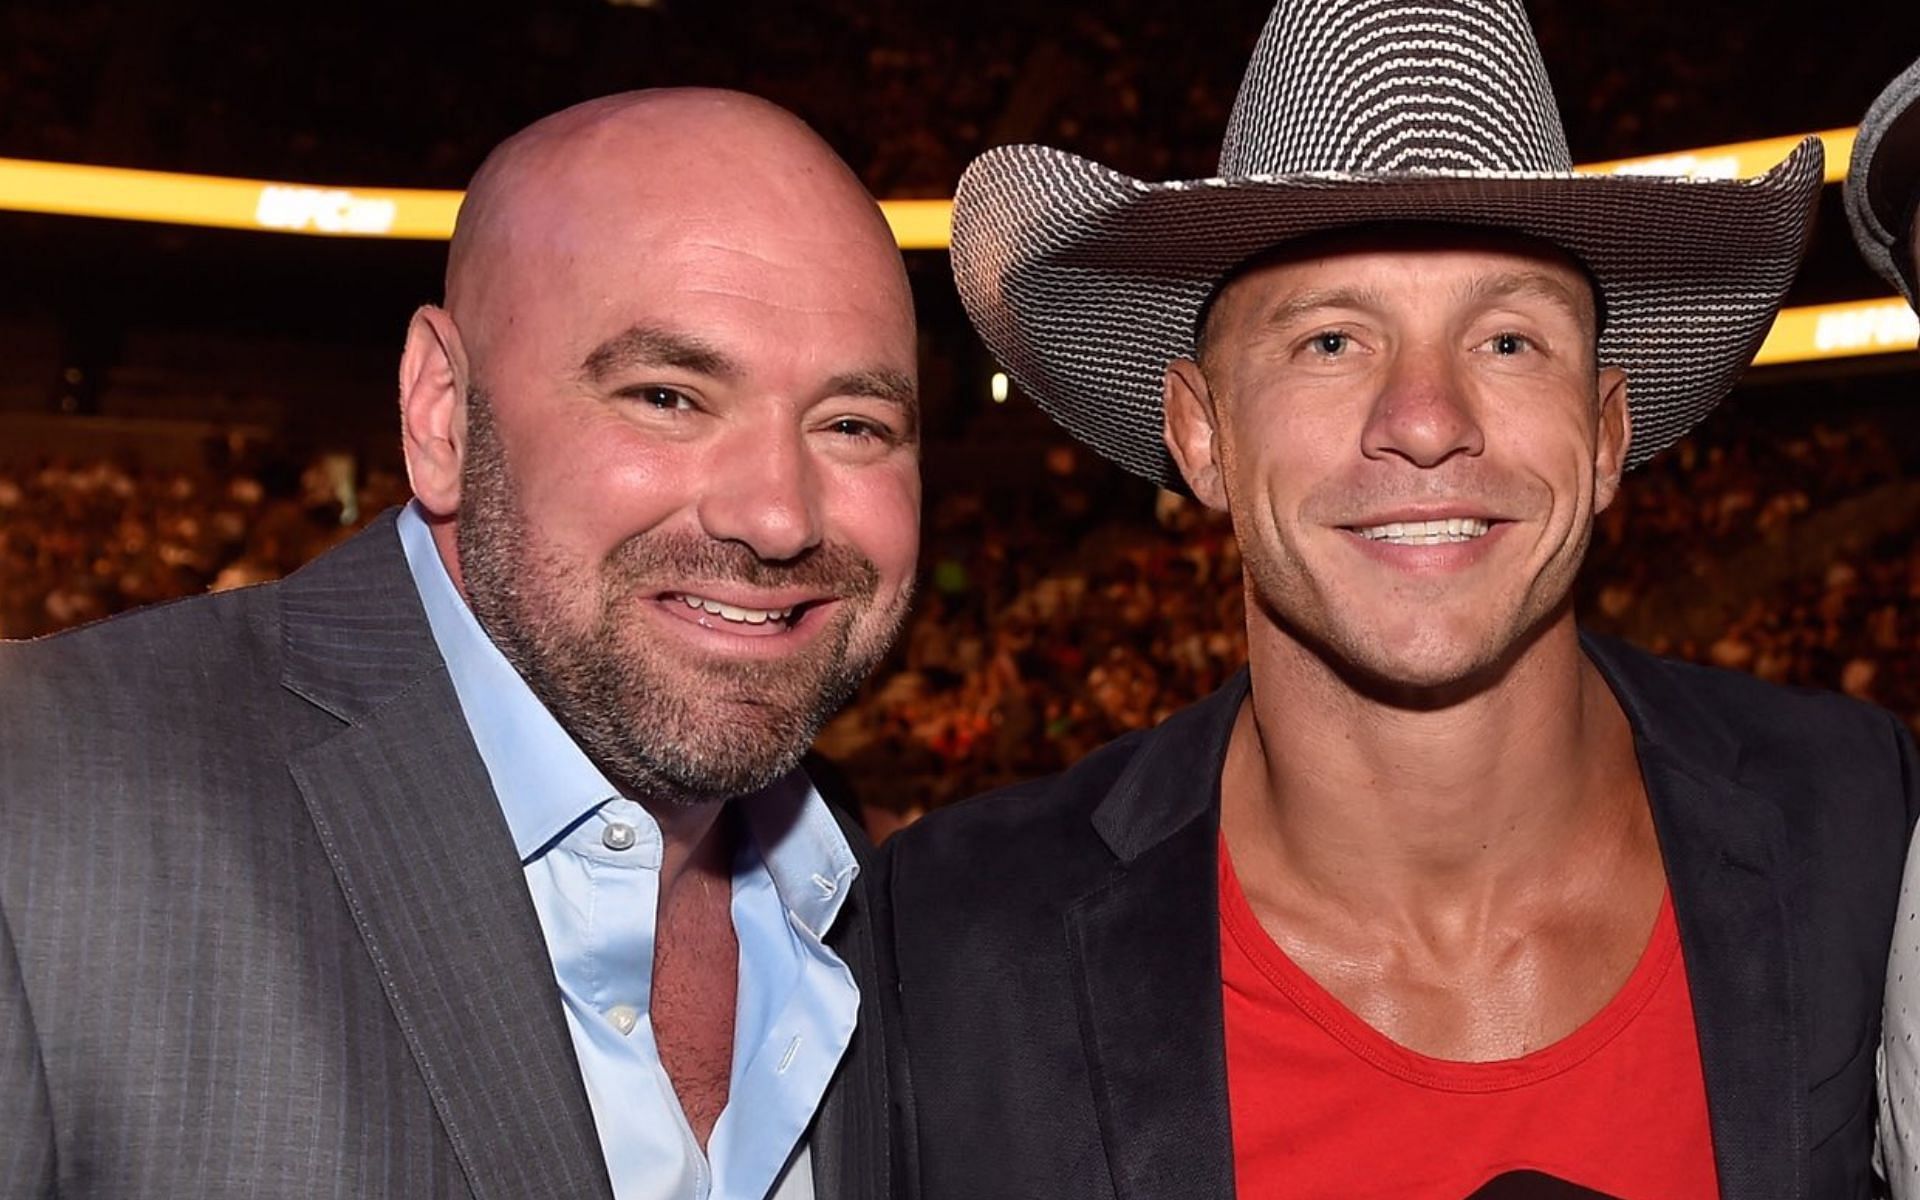 The UFC is facing a major lawsuit - so which fighters are defending Dana White and company?